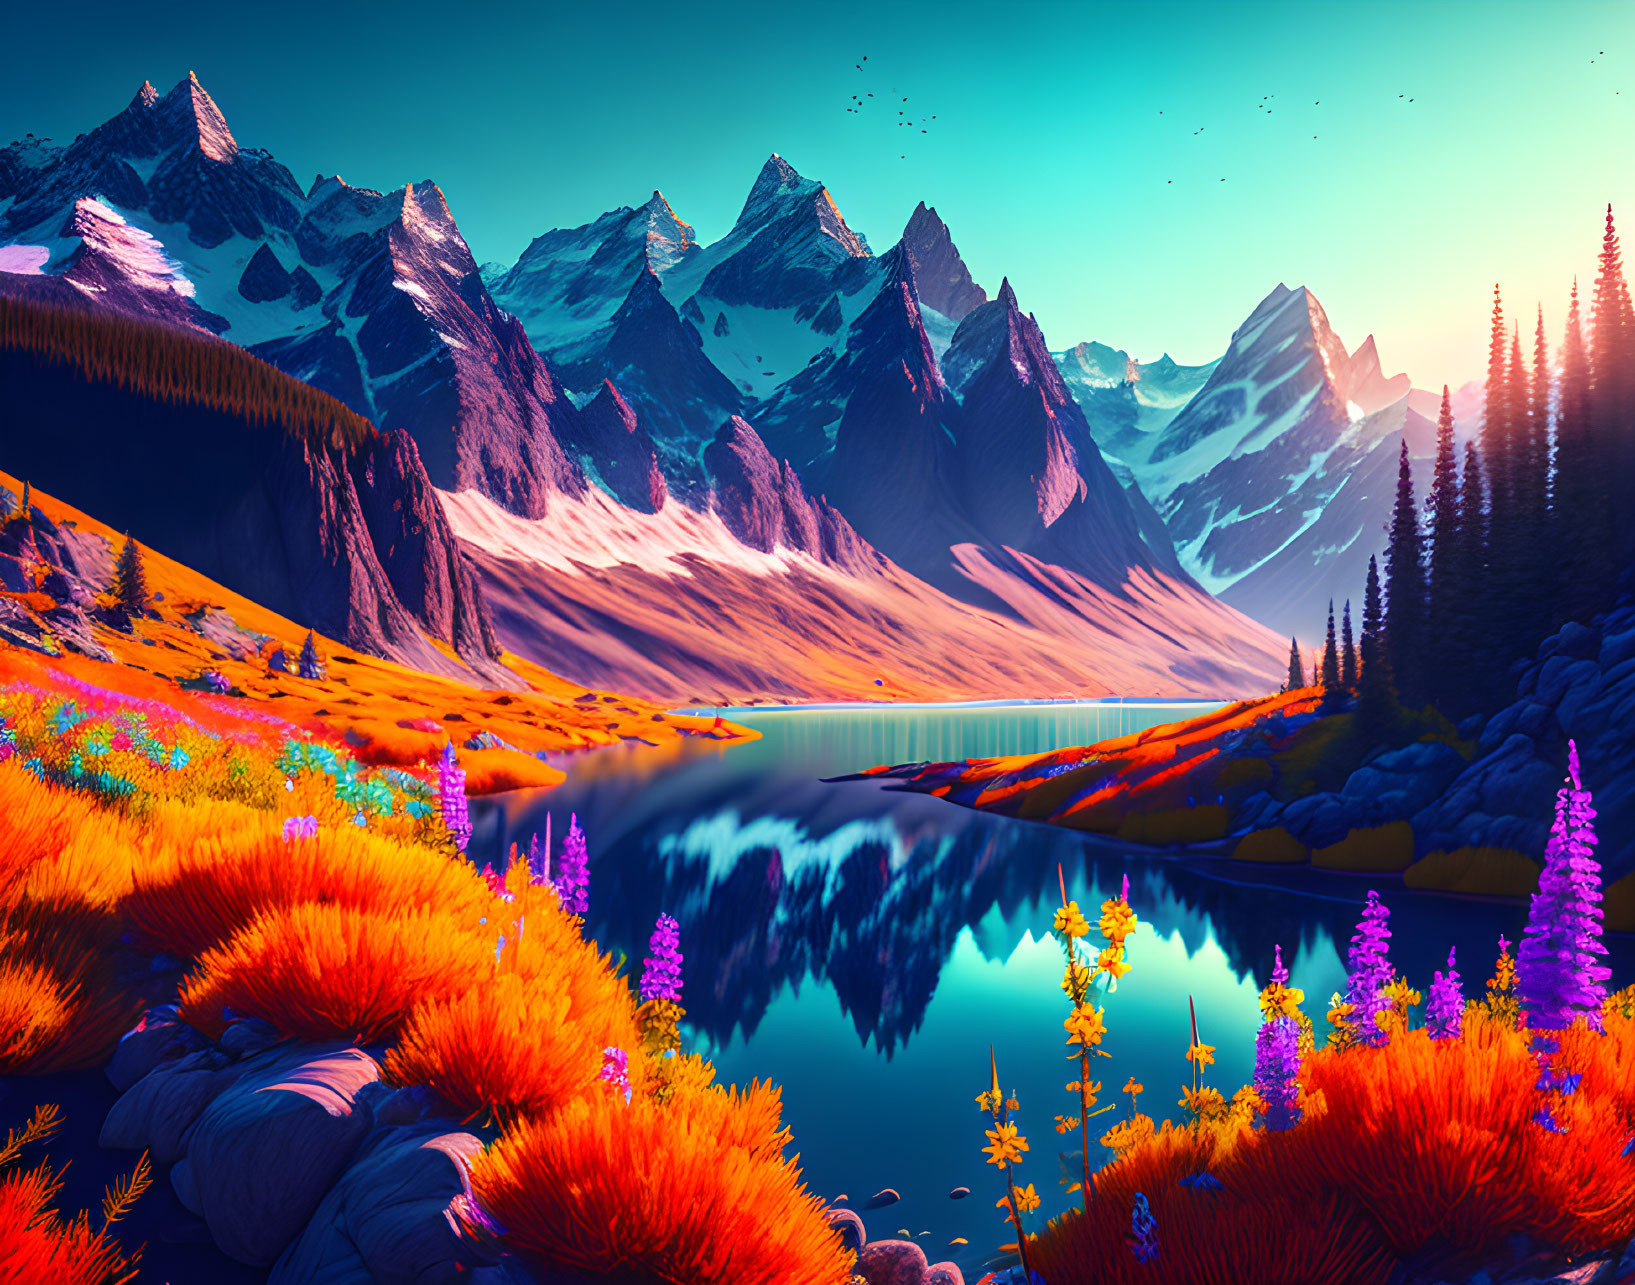 Digital artwork: Vibrant mountain landscape with lake, flora, and birds